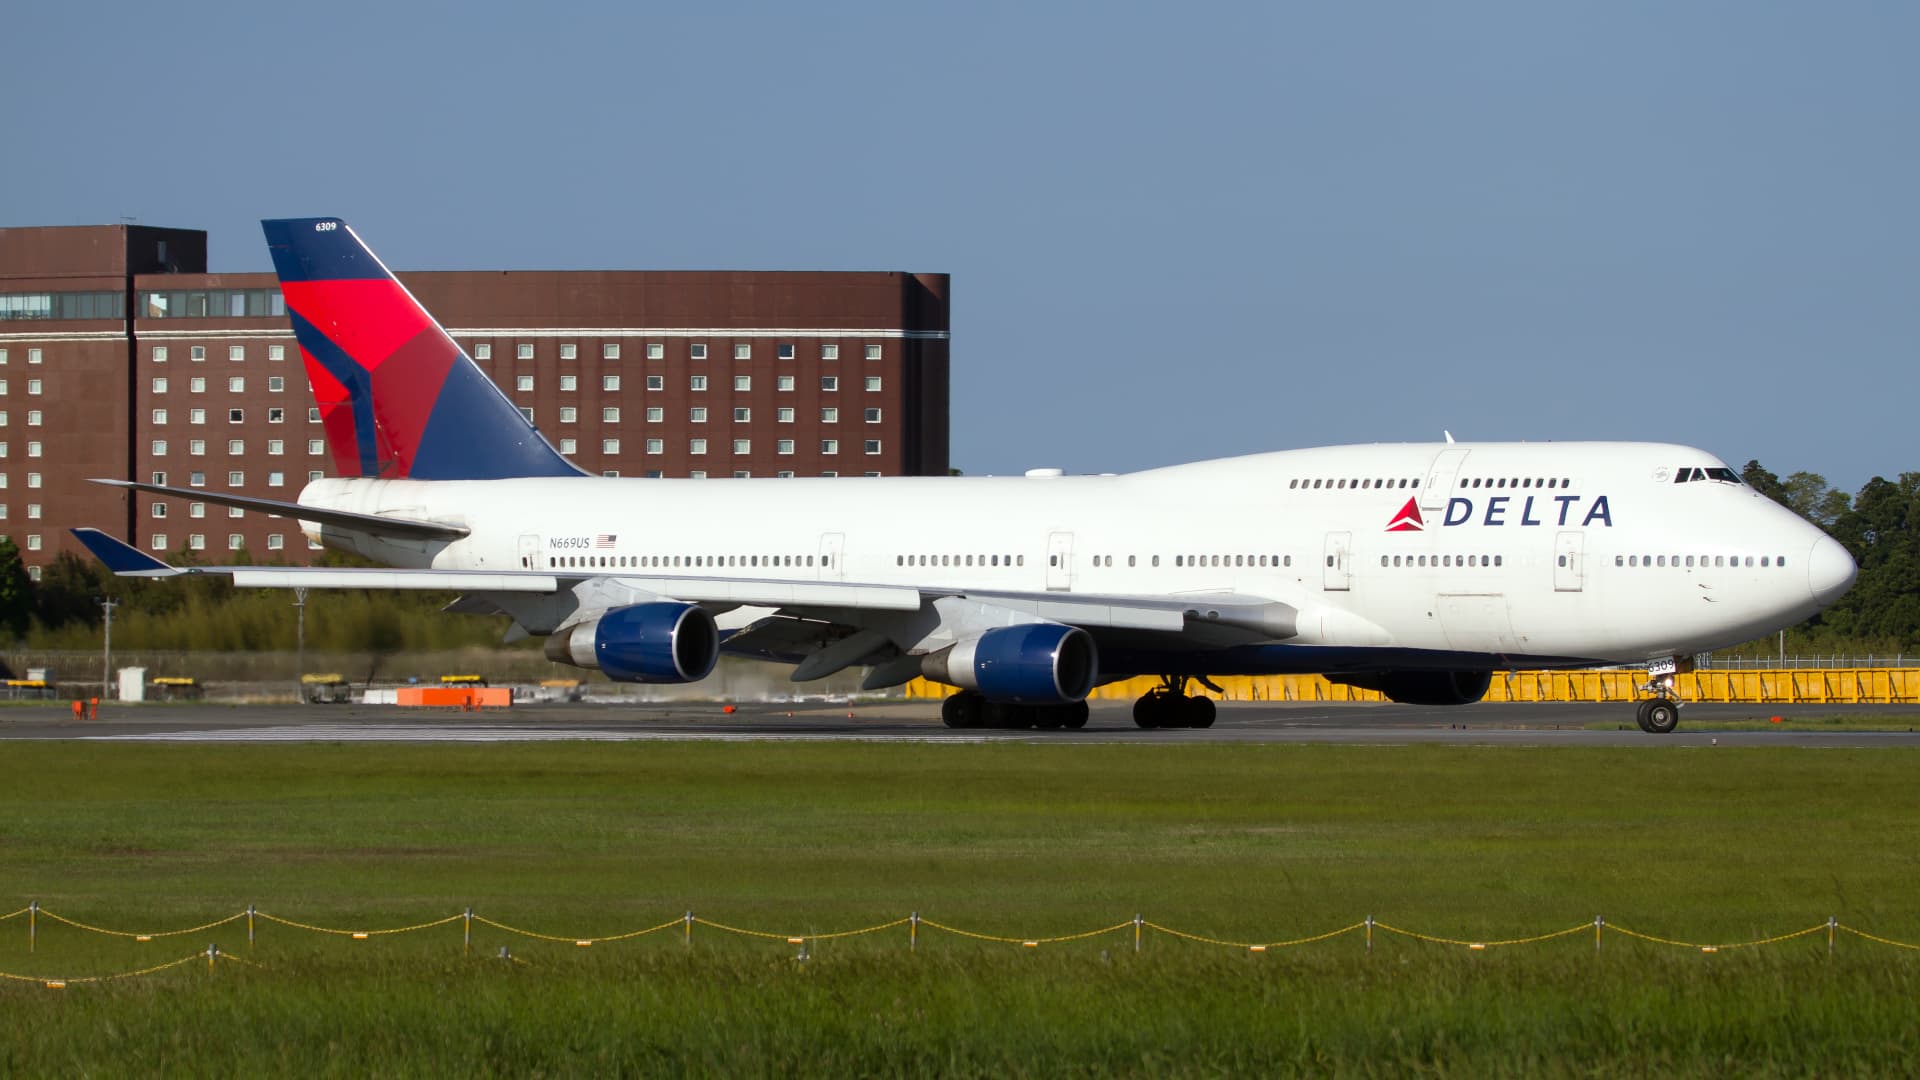 How to Get the Limited-Edition Boeing 747 Delta Reserve Card